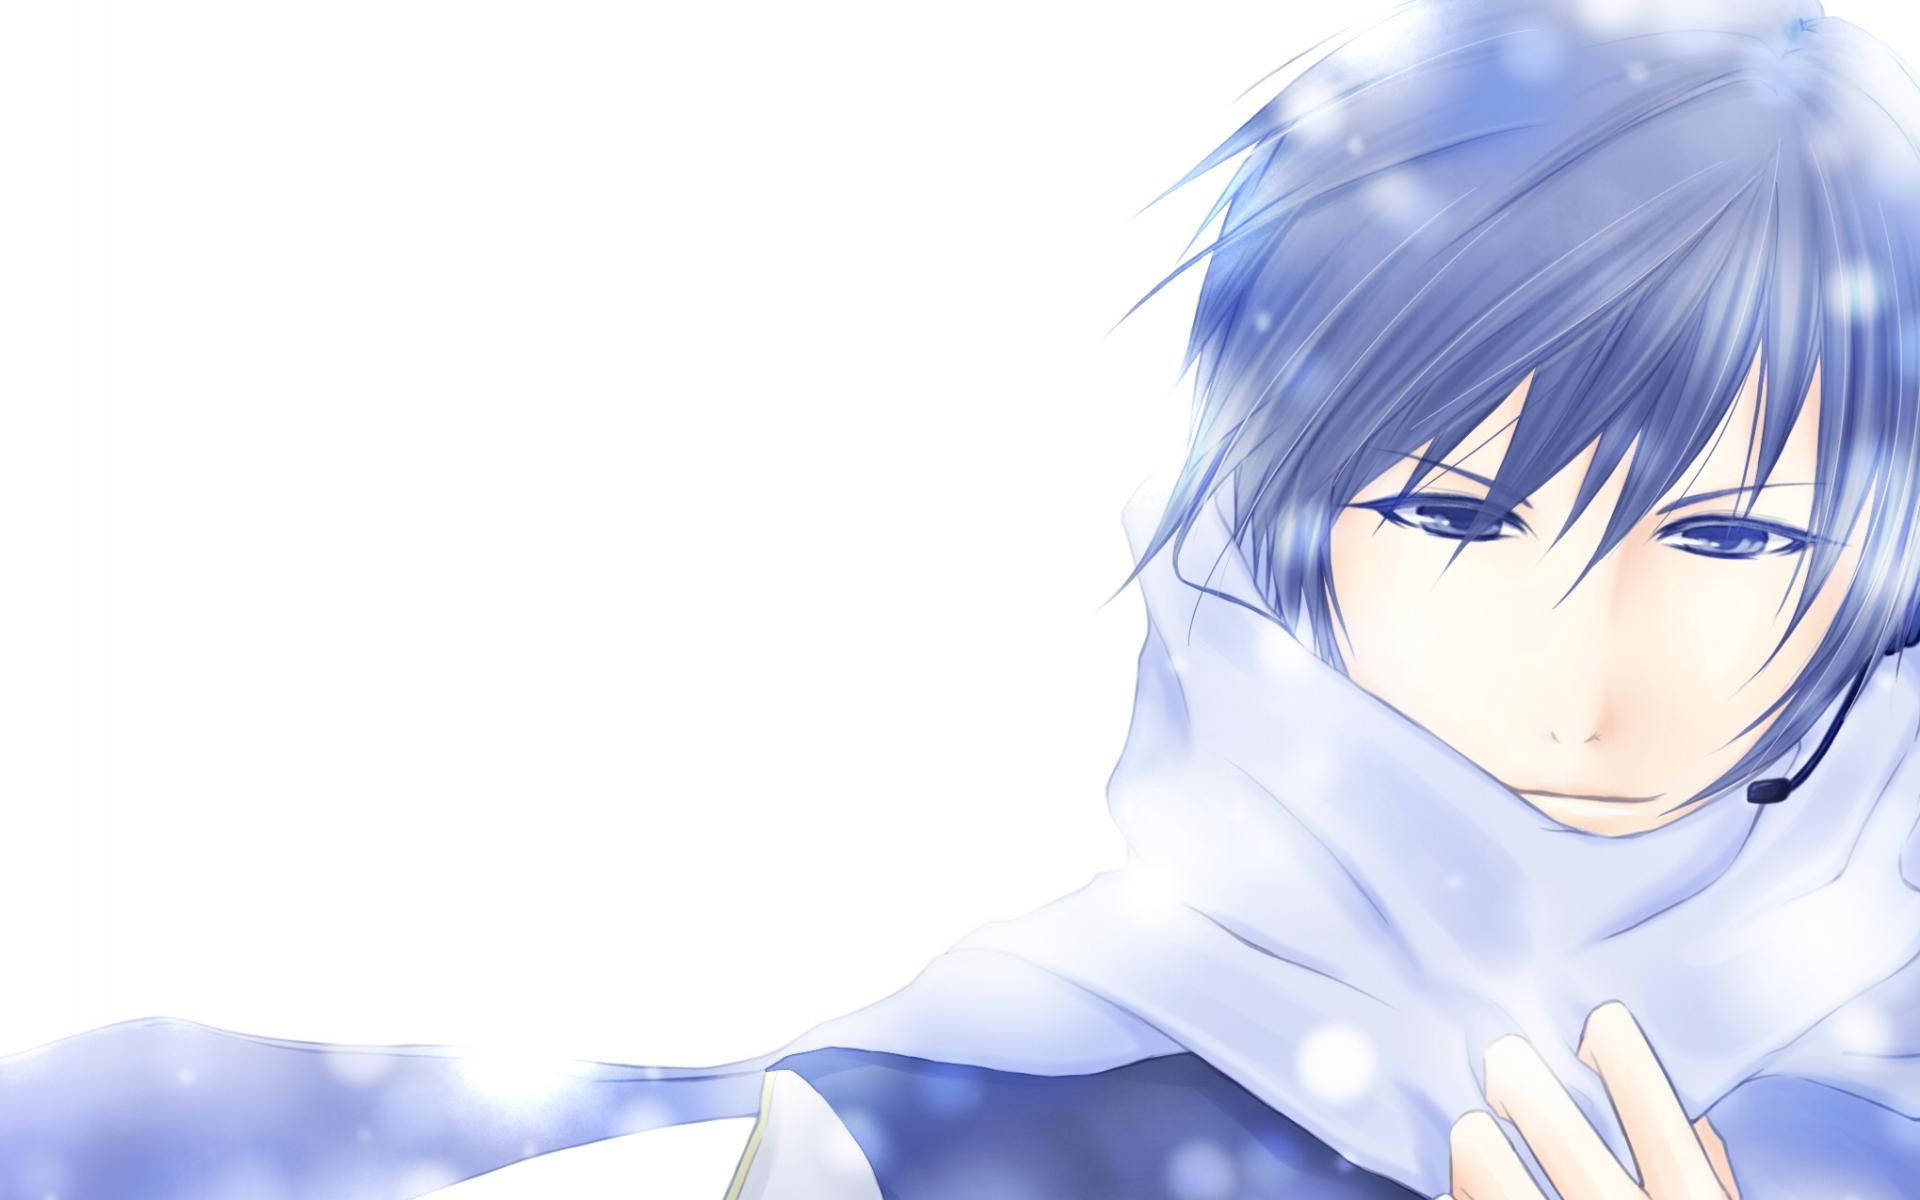 'A Cool Blue-haired Anime Boy in Winter Wonderland.' Wallpaper